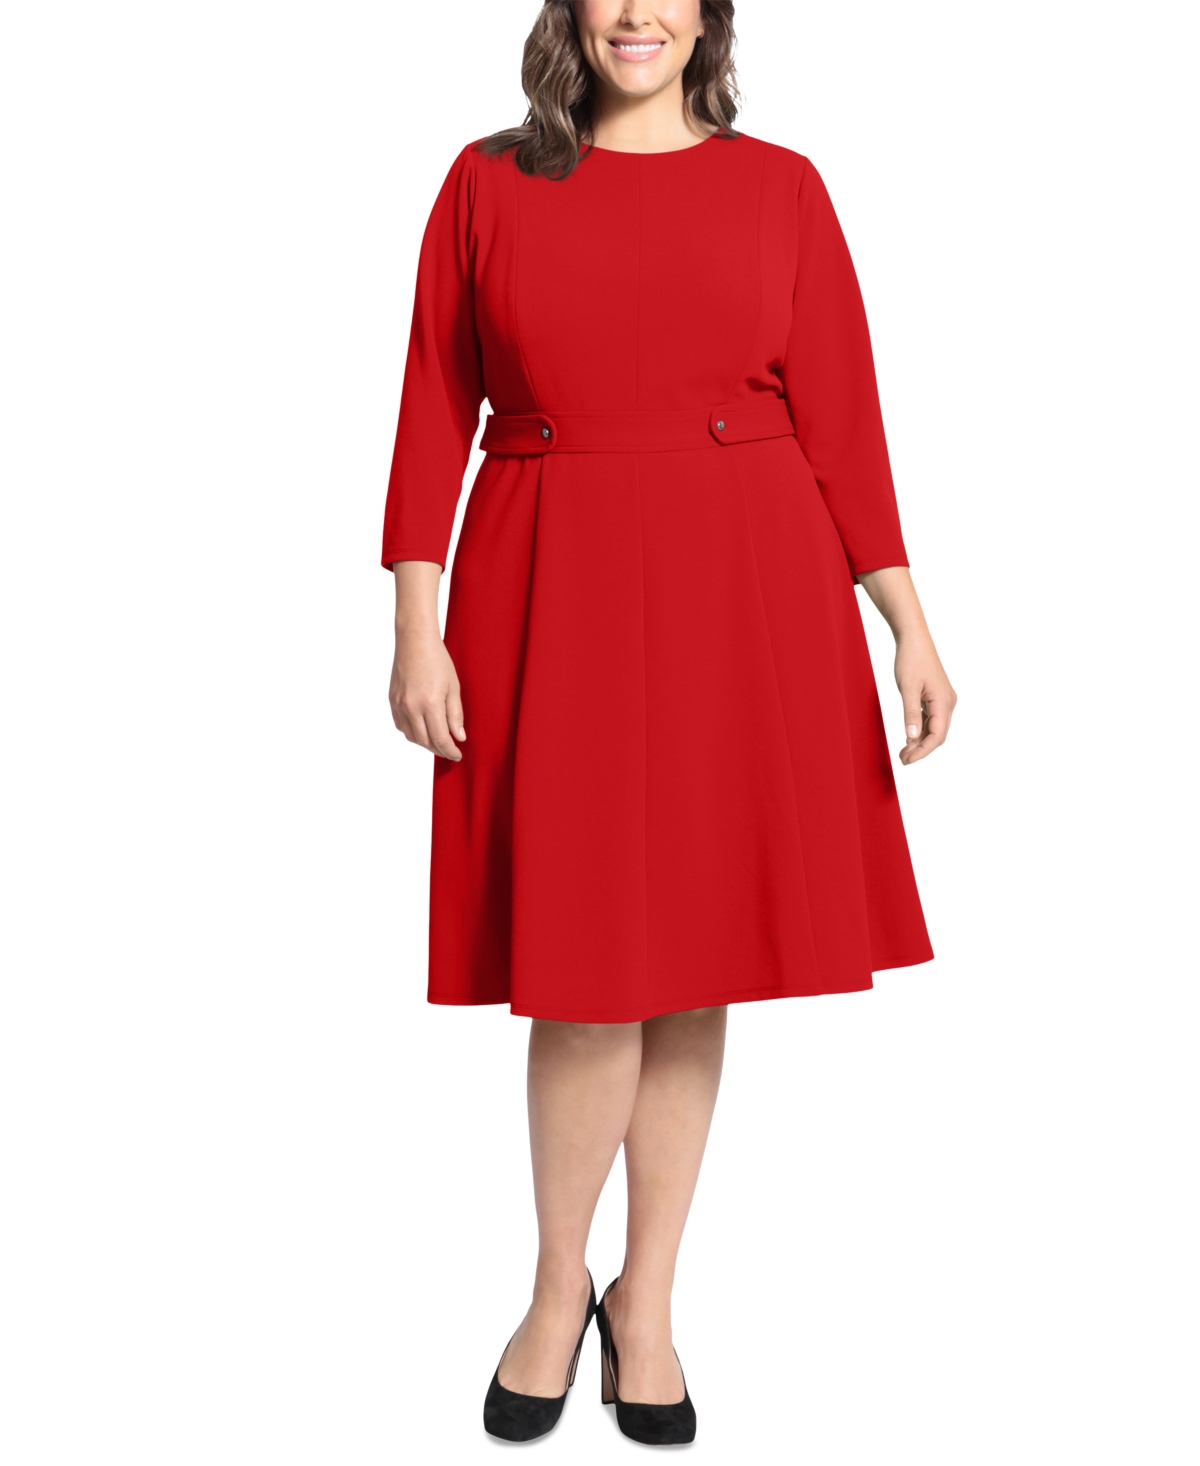 Plus Size 3/4-Sleeve Tab-Waist Fit & Flare Dress - Red